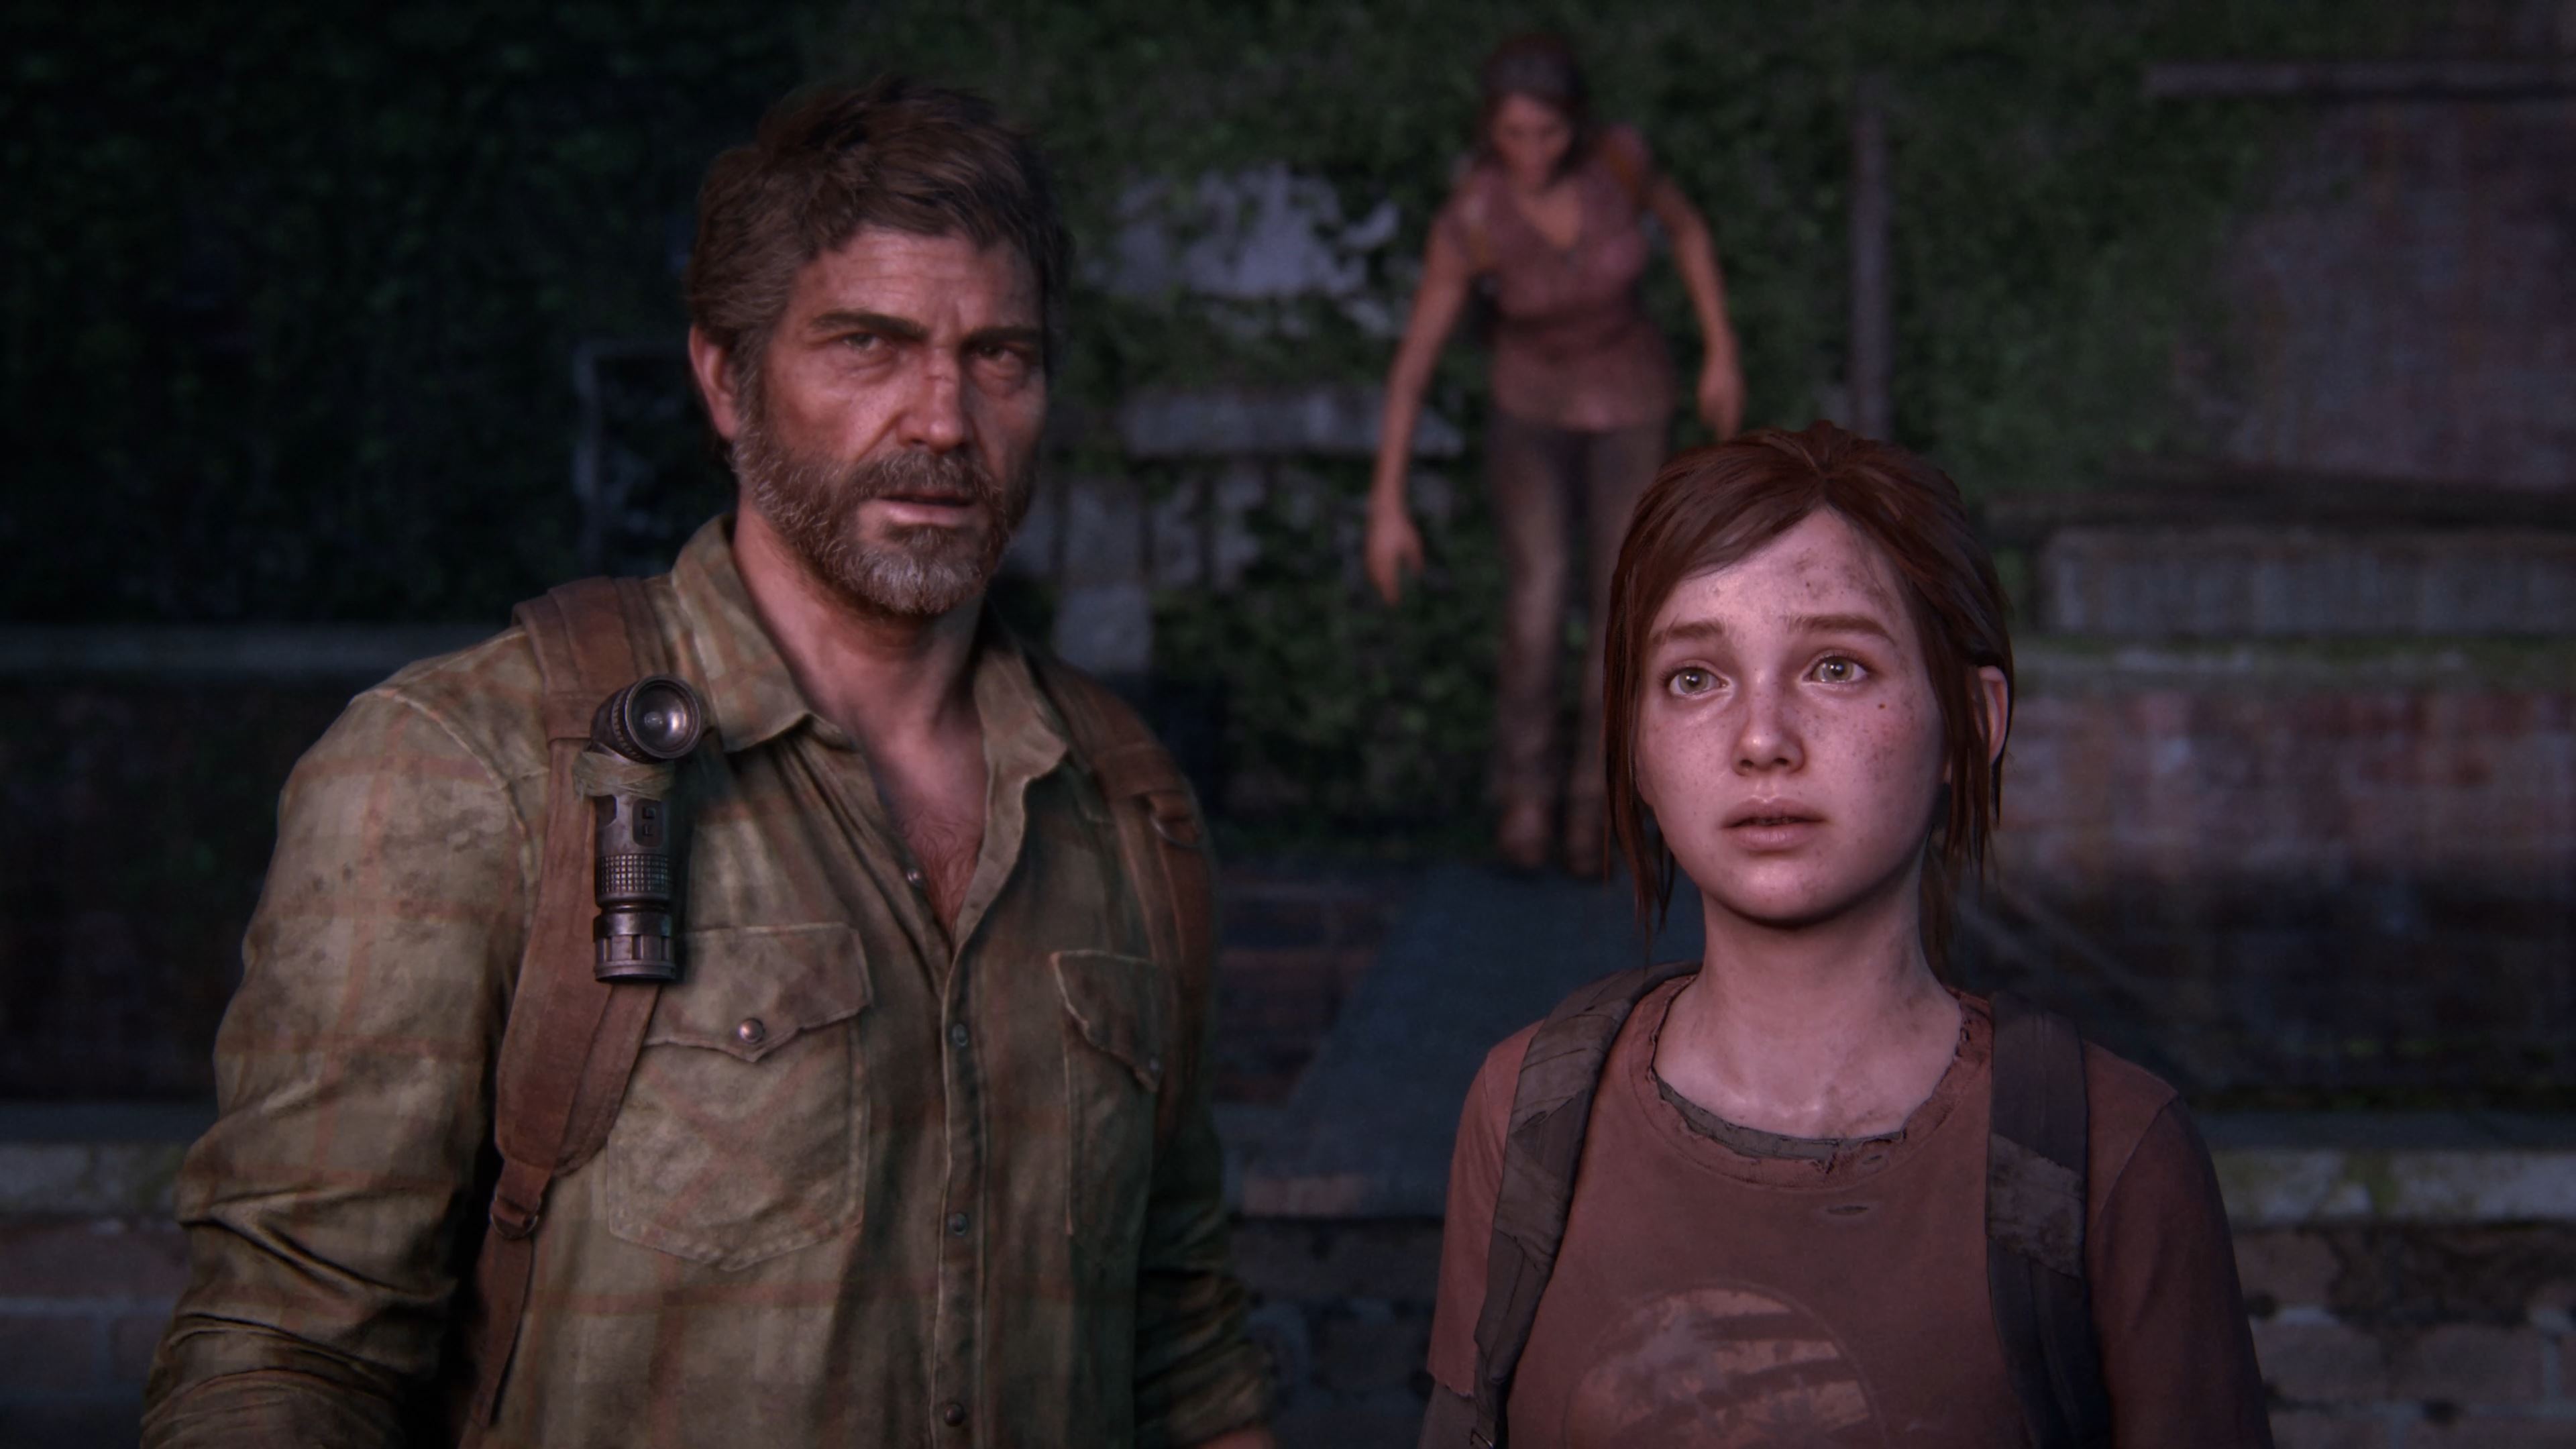 The Last of Us PS5 Remake Leak Reveals High Price Tag, Stunning Graphics, and Lack of Multiplayer. Den of Geek